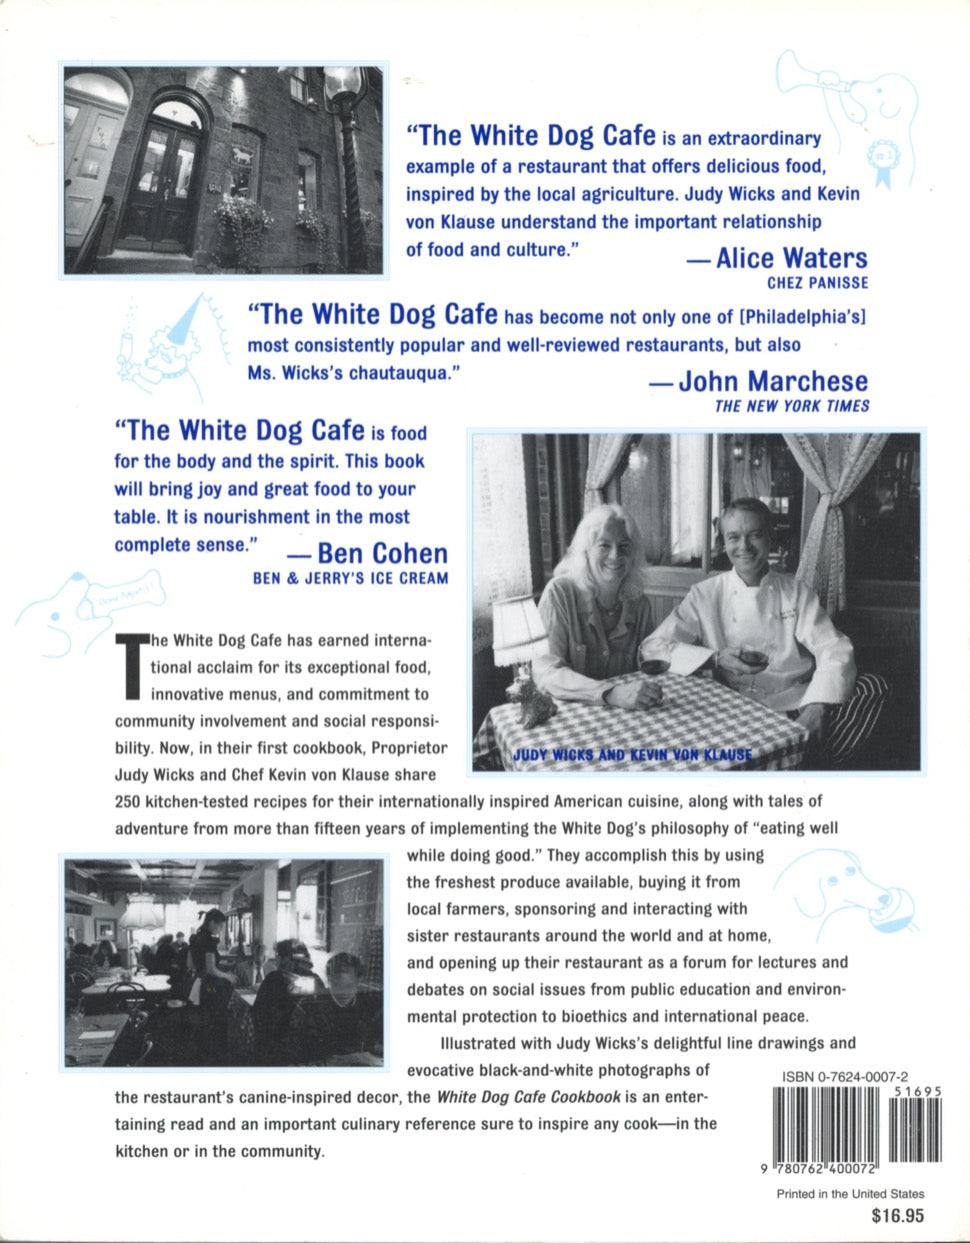 WHITE DOG CAFE COOKBOOK: Multicultural Recipes and Tales of Adventure from Philadelphia's Revolutionary Restaurant | ©1998